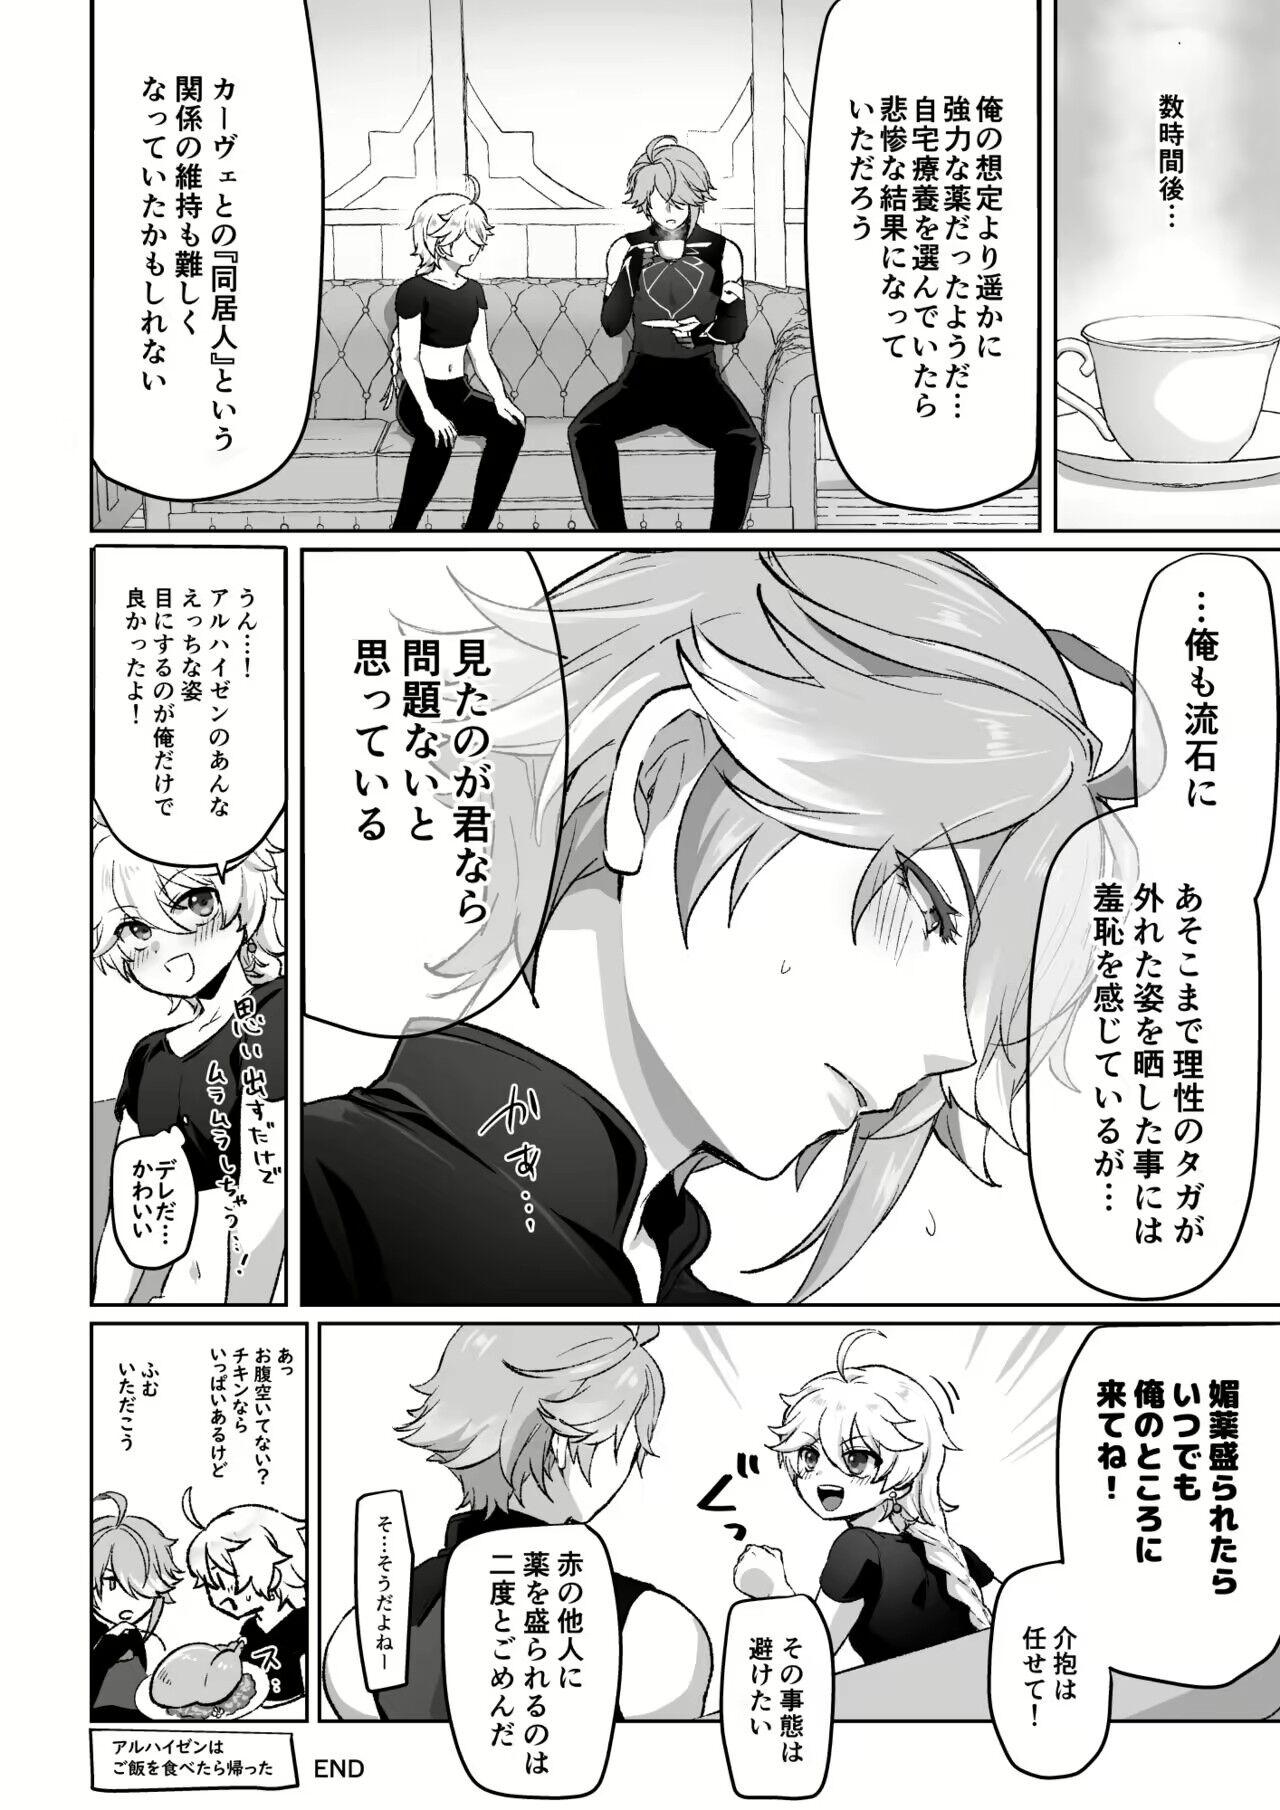 Whipping 媚薬を盛られた書記官の話 - Genshin impact Stepfamily - Page 12